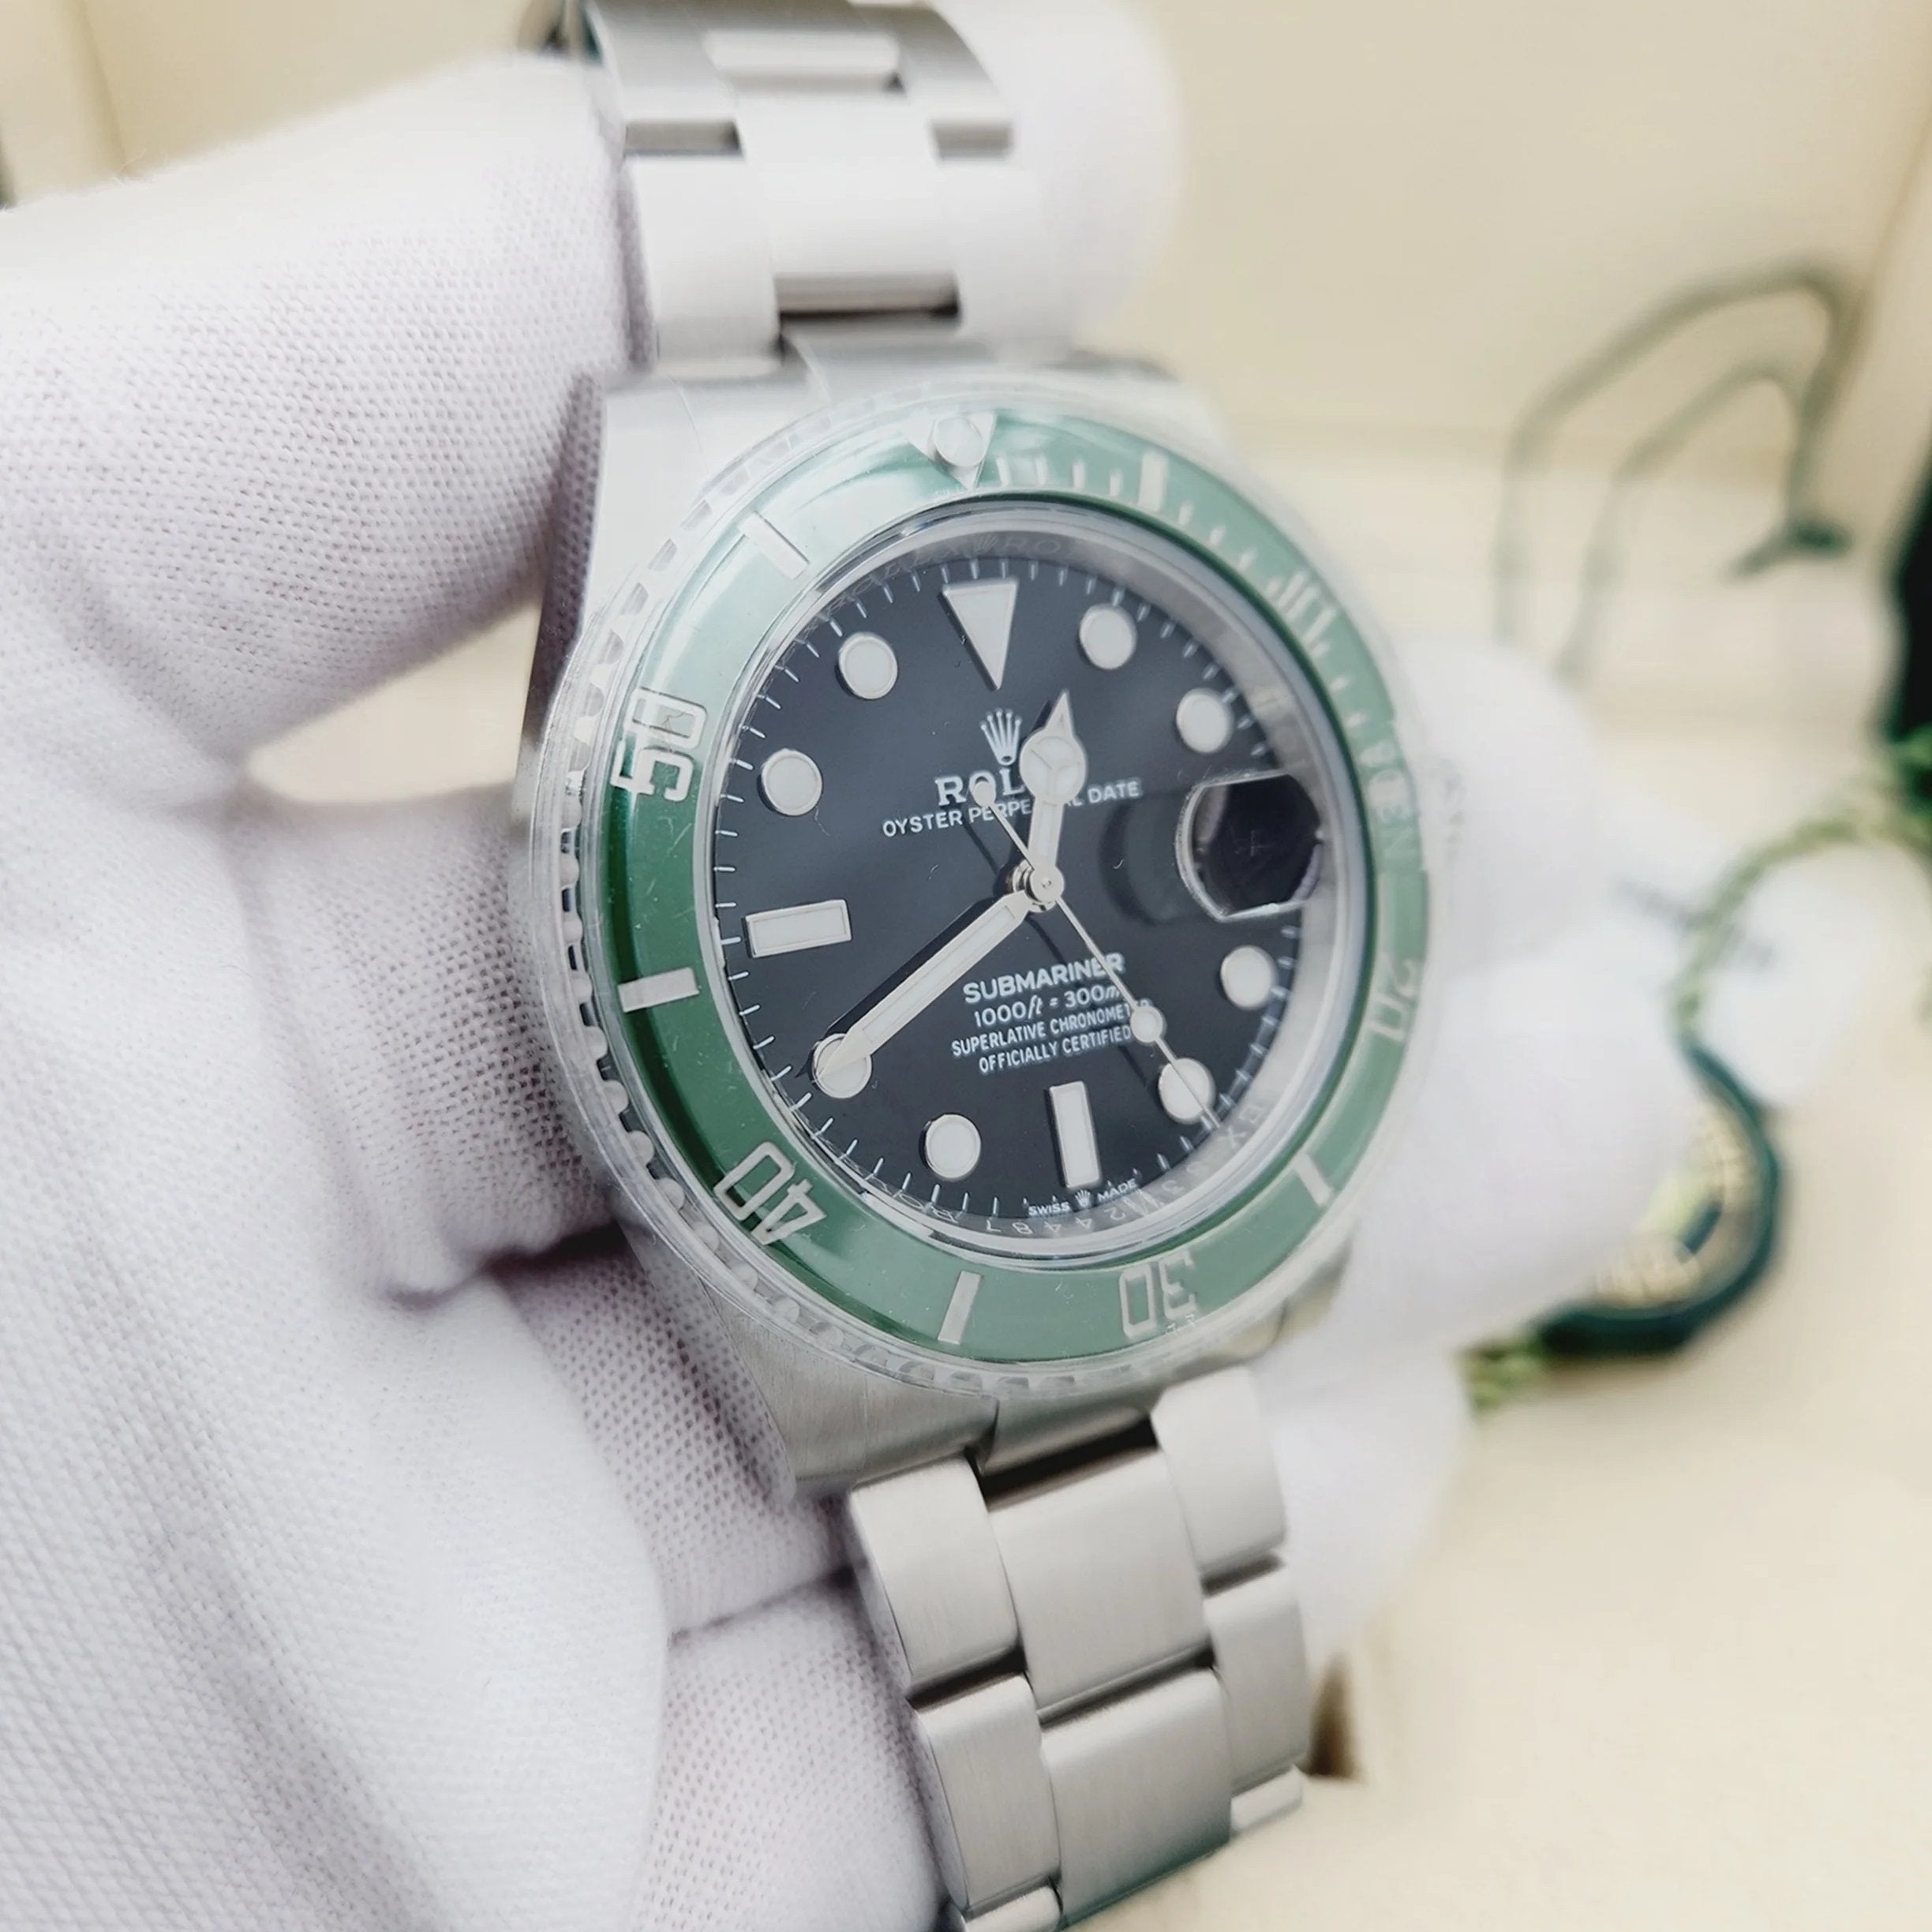 *2024 Men's Rolex 41mm Submariner Date "Starbucks" Oyster Perpetual Stainless Steel Watch with Black Dial and Green Ceramic Bezel. (NEW 126610LV)